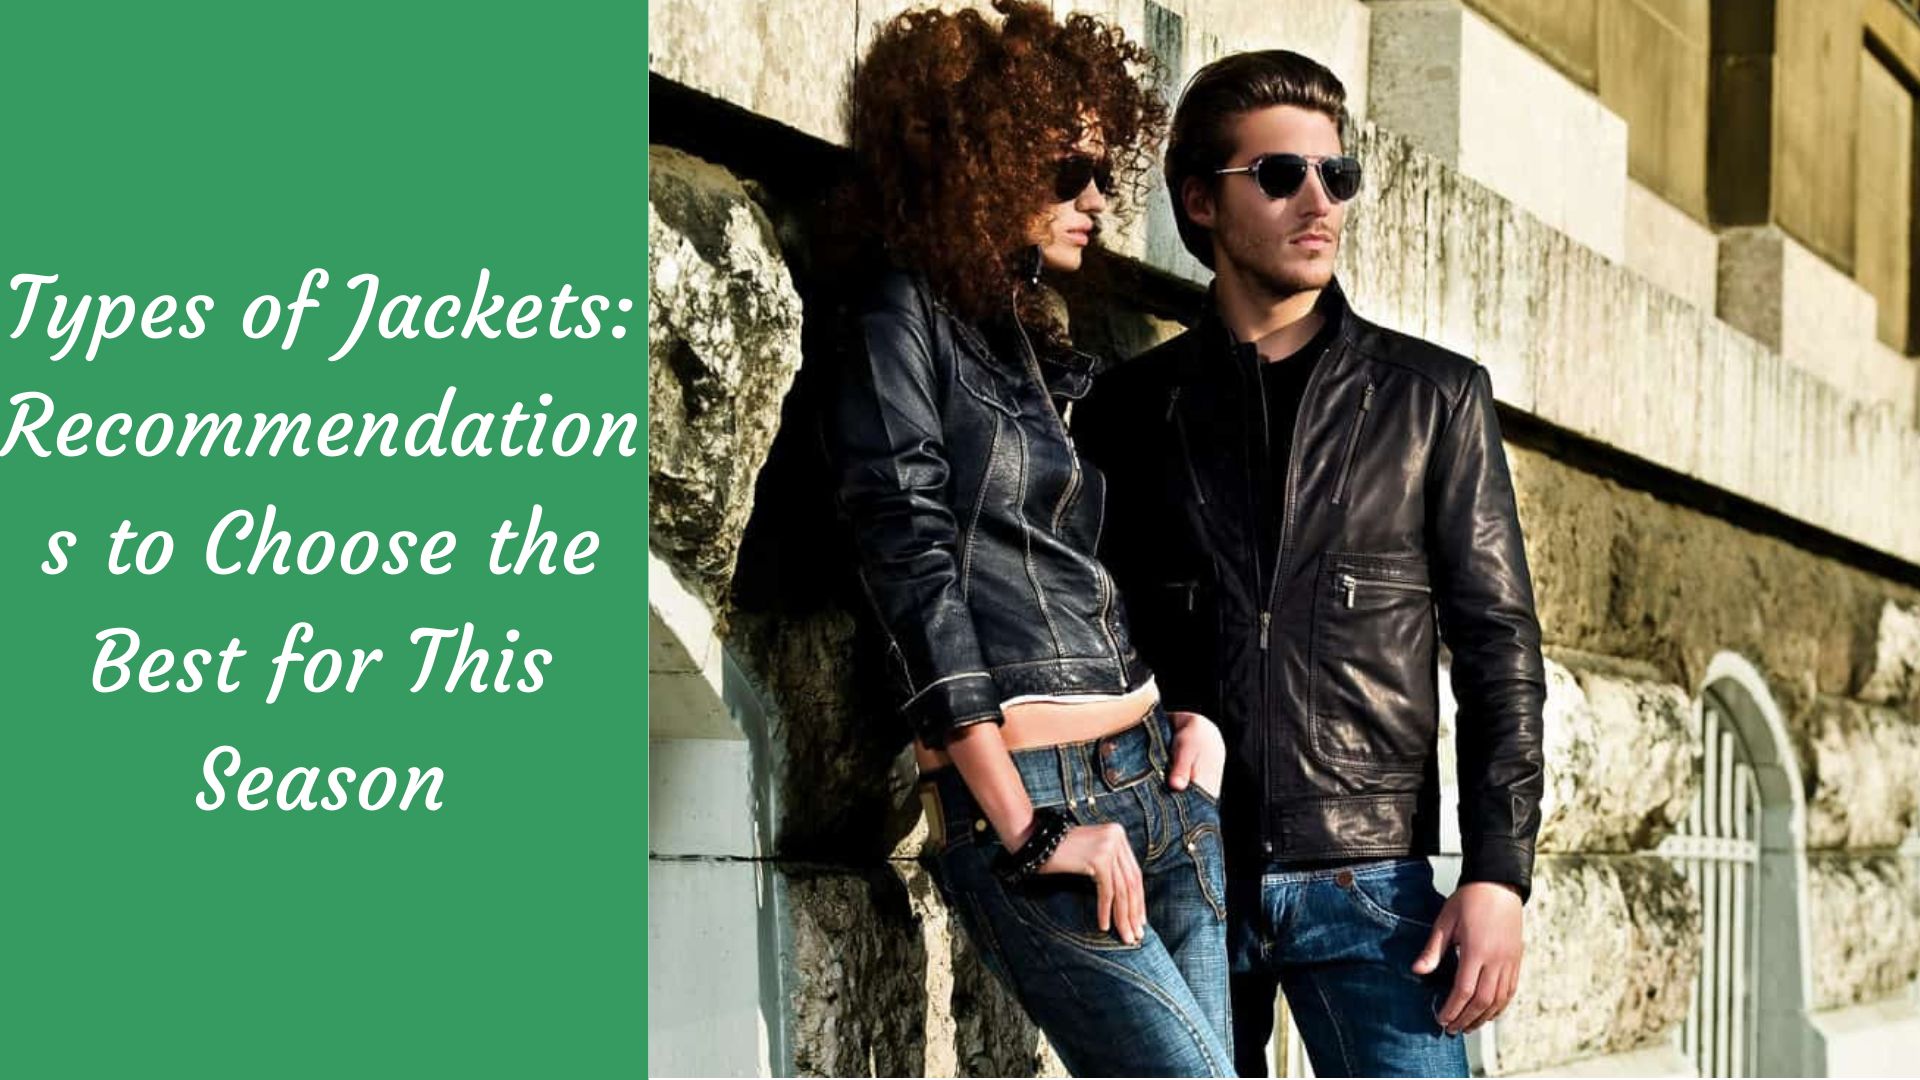 Types of Jackets: Recommendations to Choose the Best for This Season